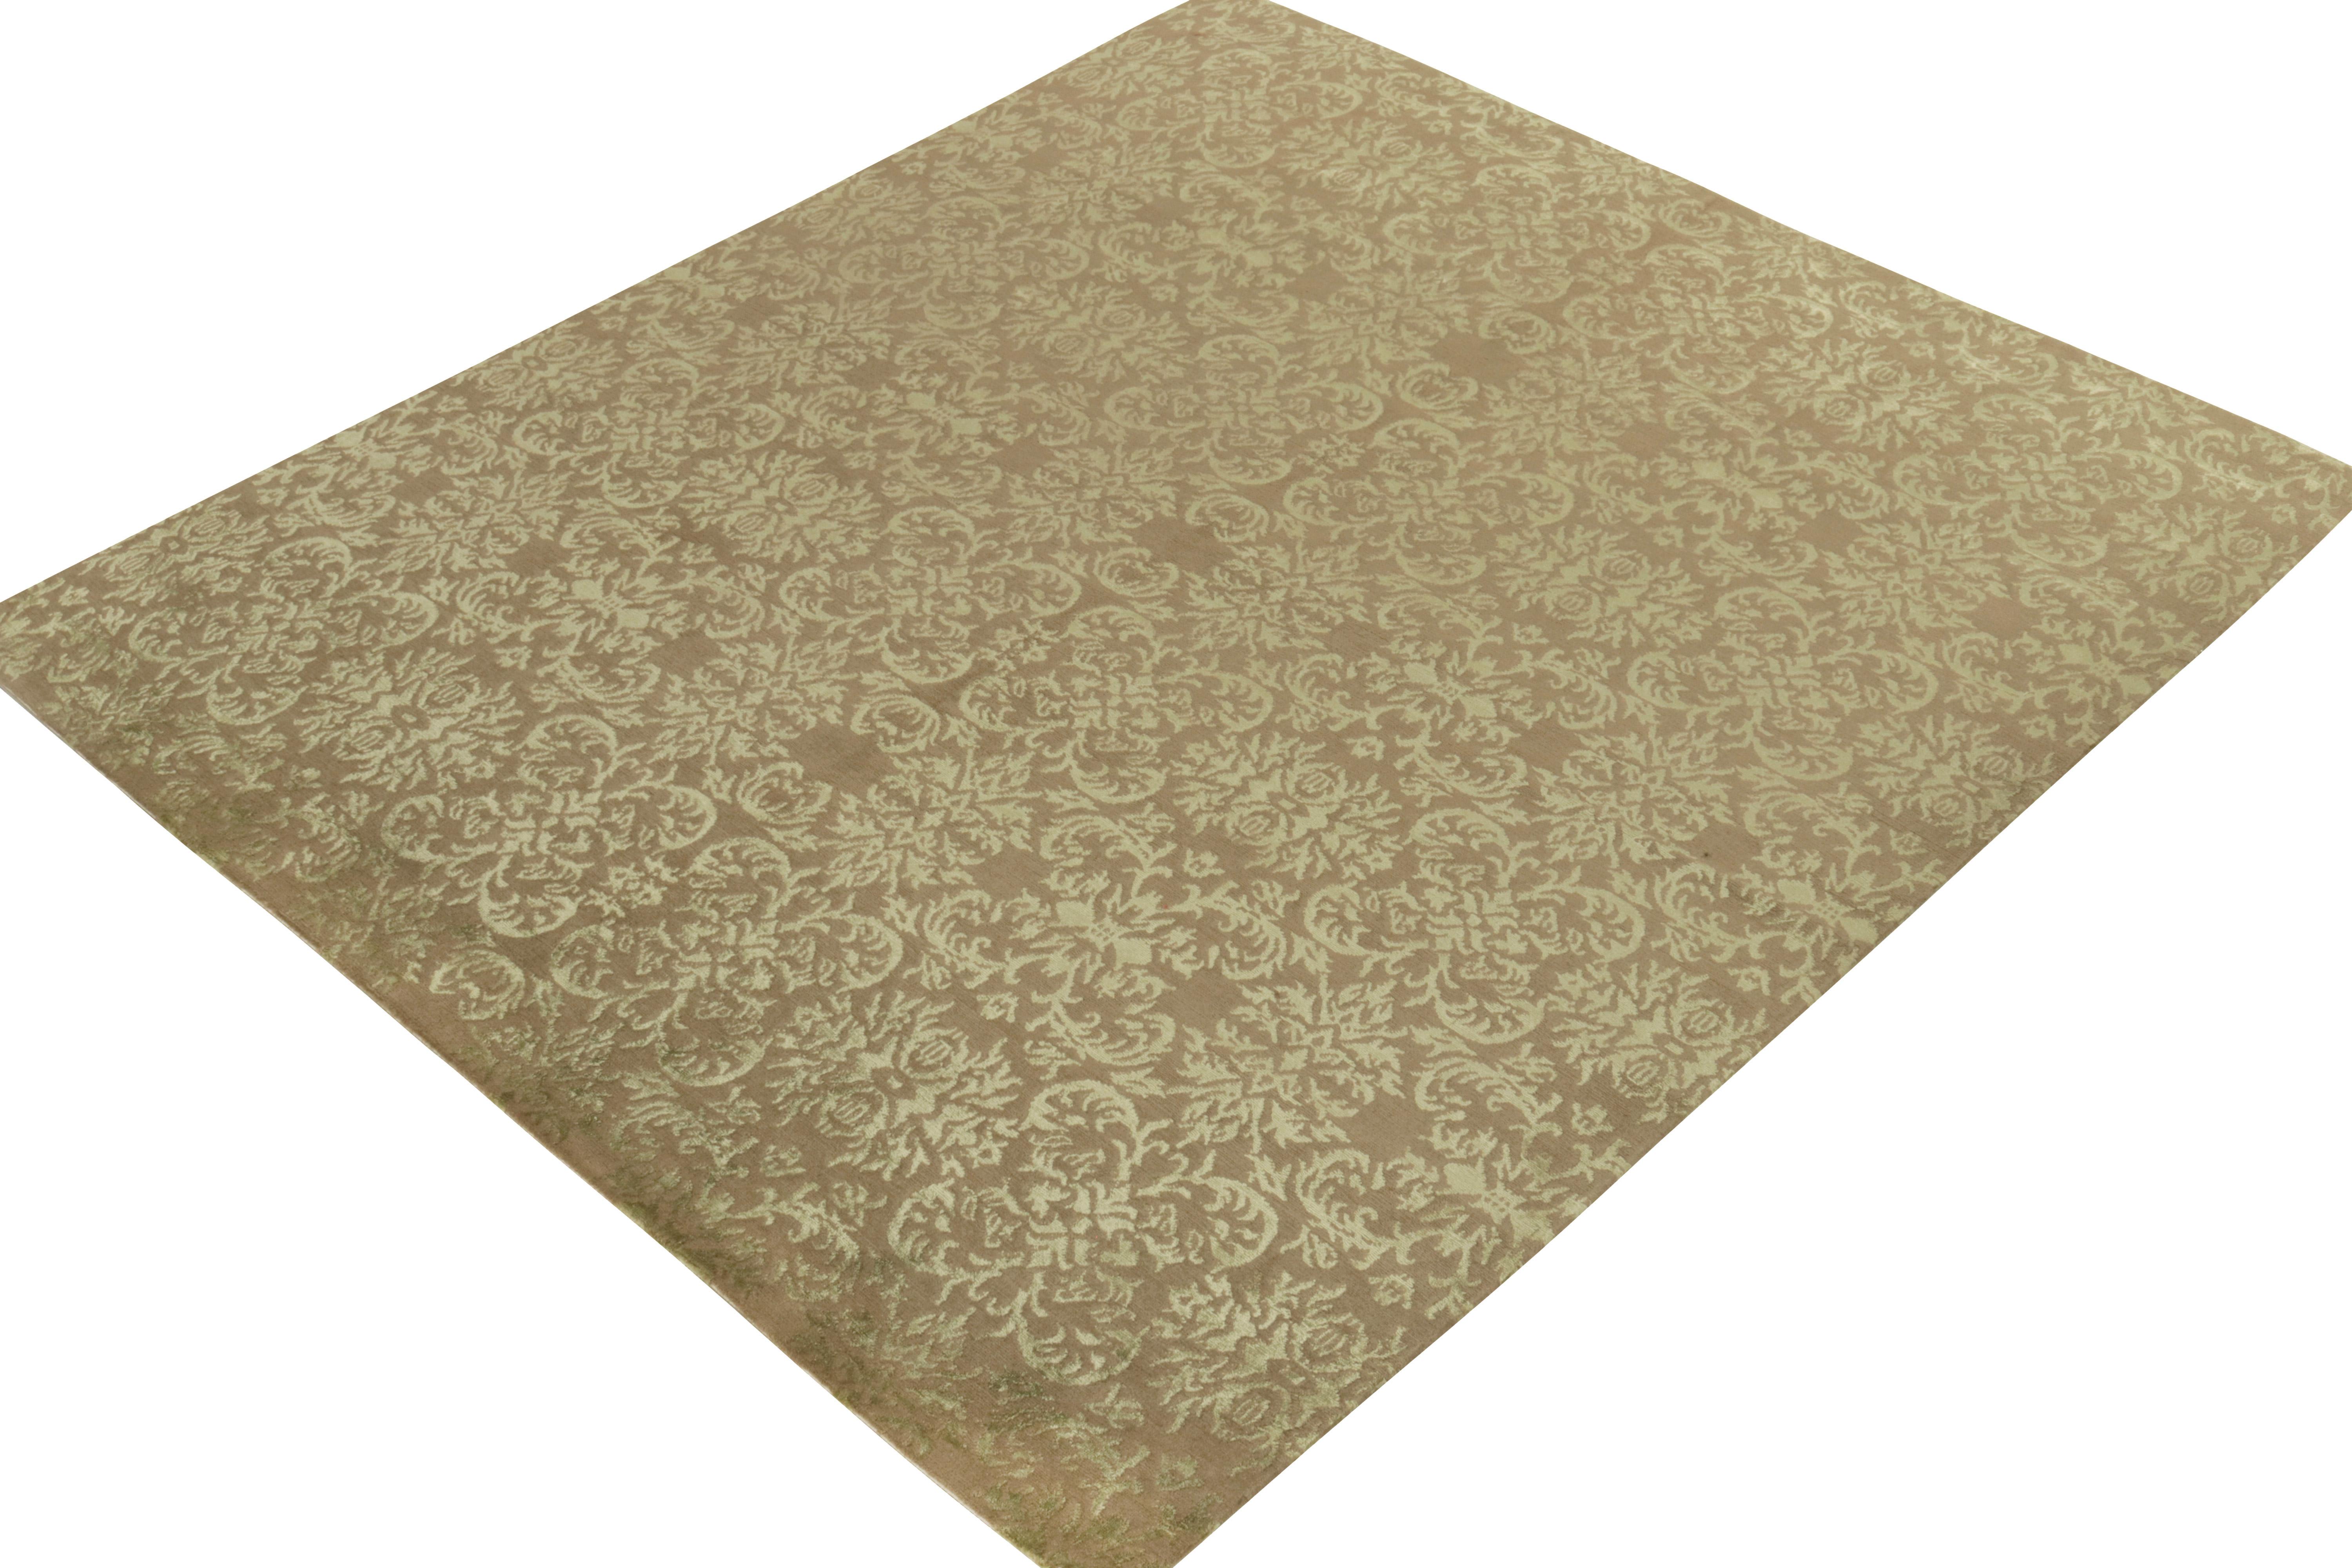 Other Rug & Kilim Handknotted Classic European Style Rug in Beige Brown Floral Pattern For Sale